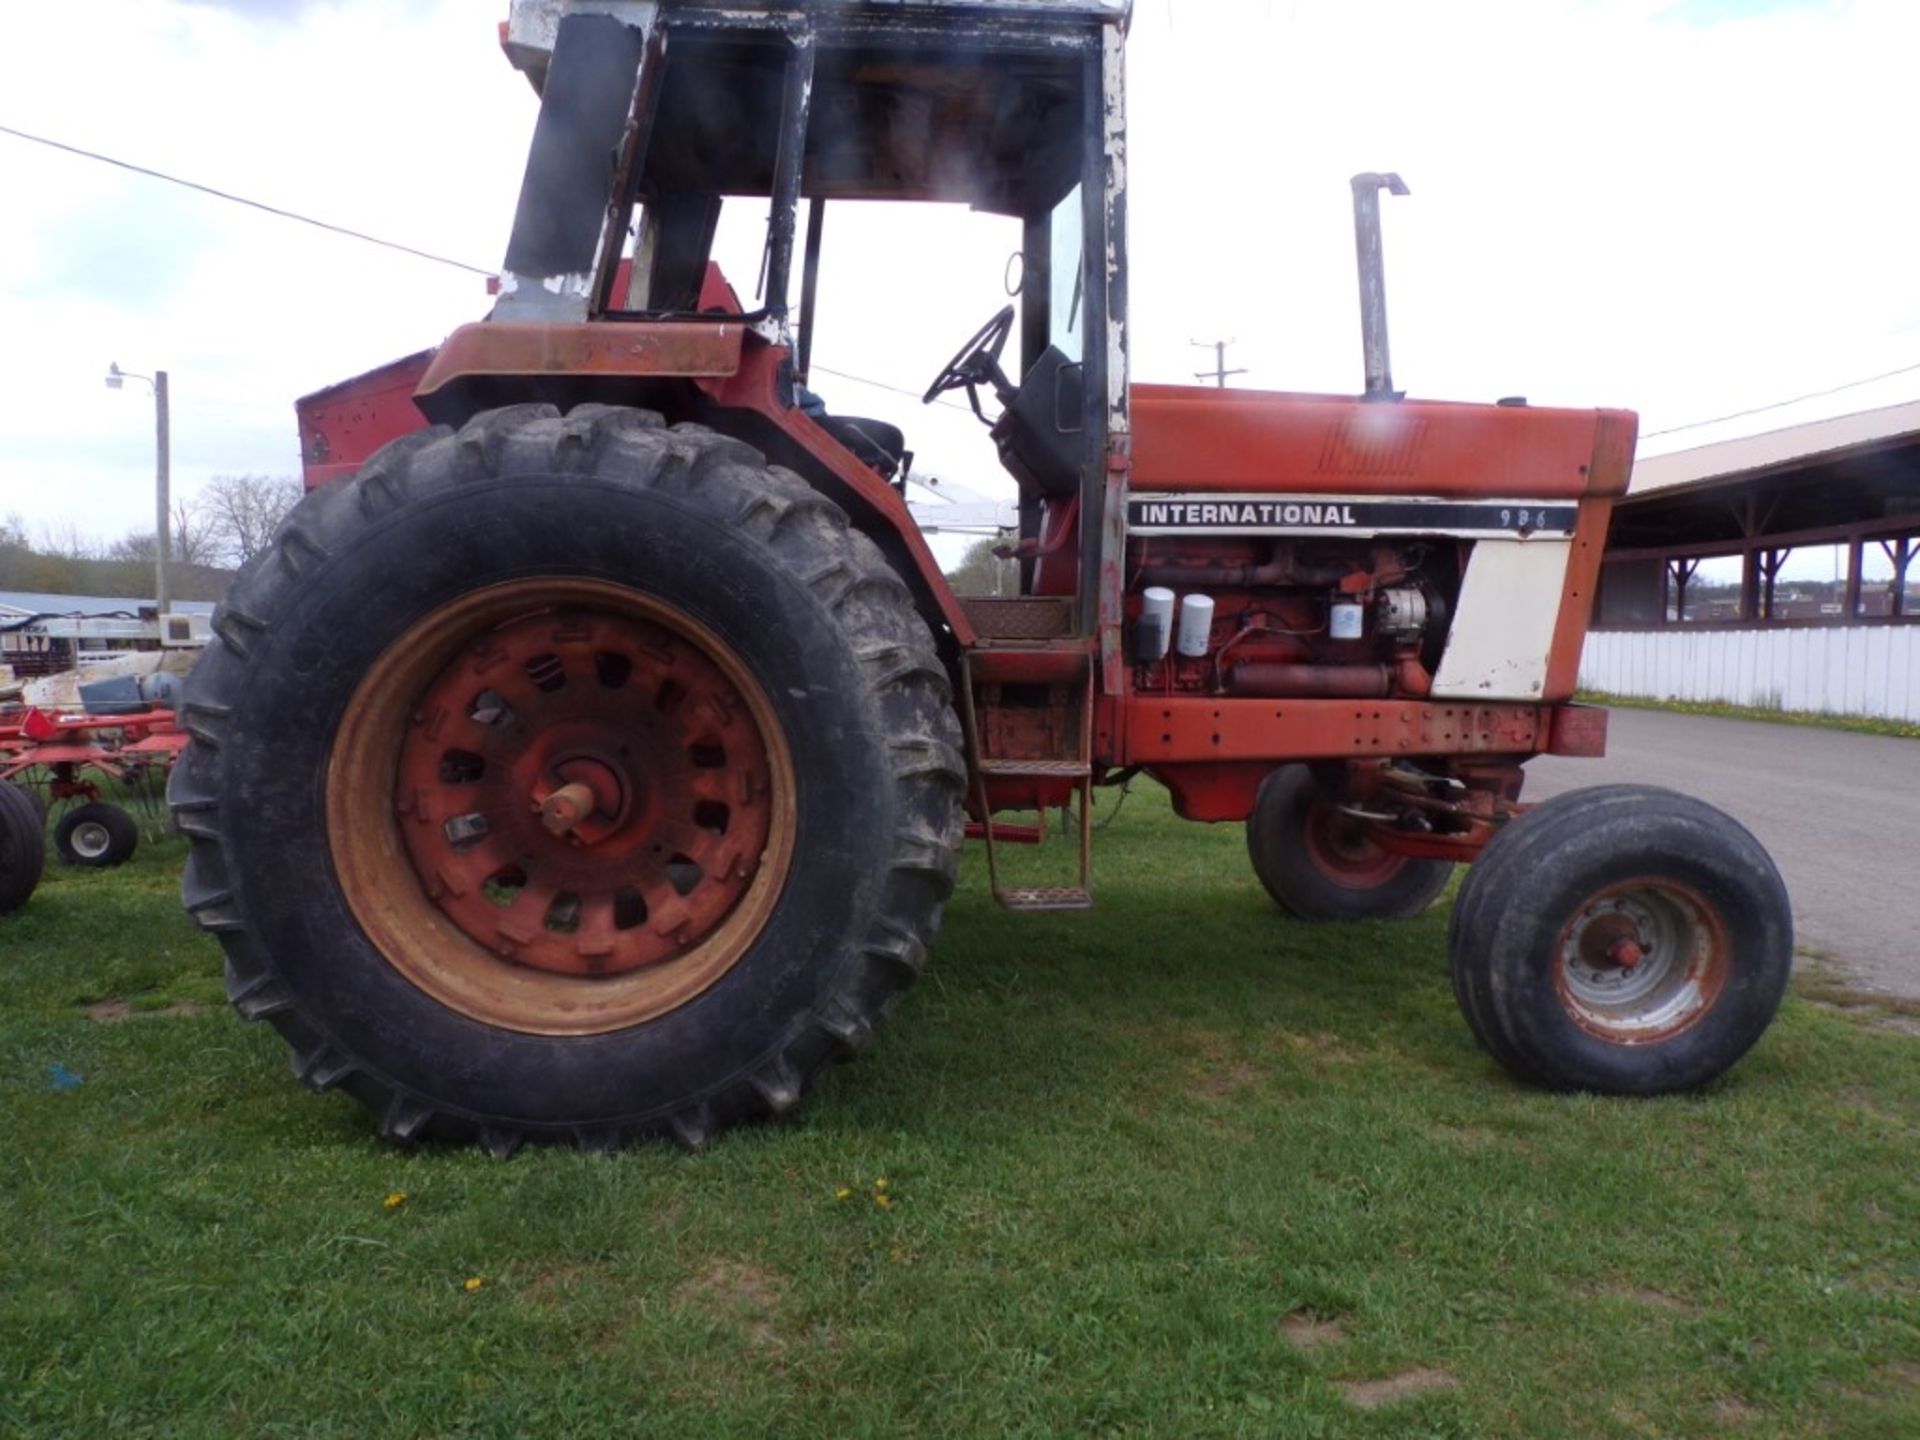 International 986, 2WD, TA Works Good, (2) PTOs, Dual Remote, No Doors, Can't See Hours (5470)